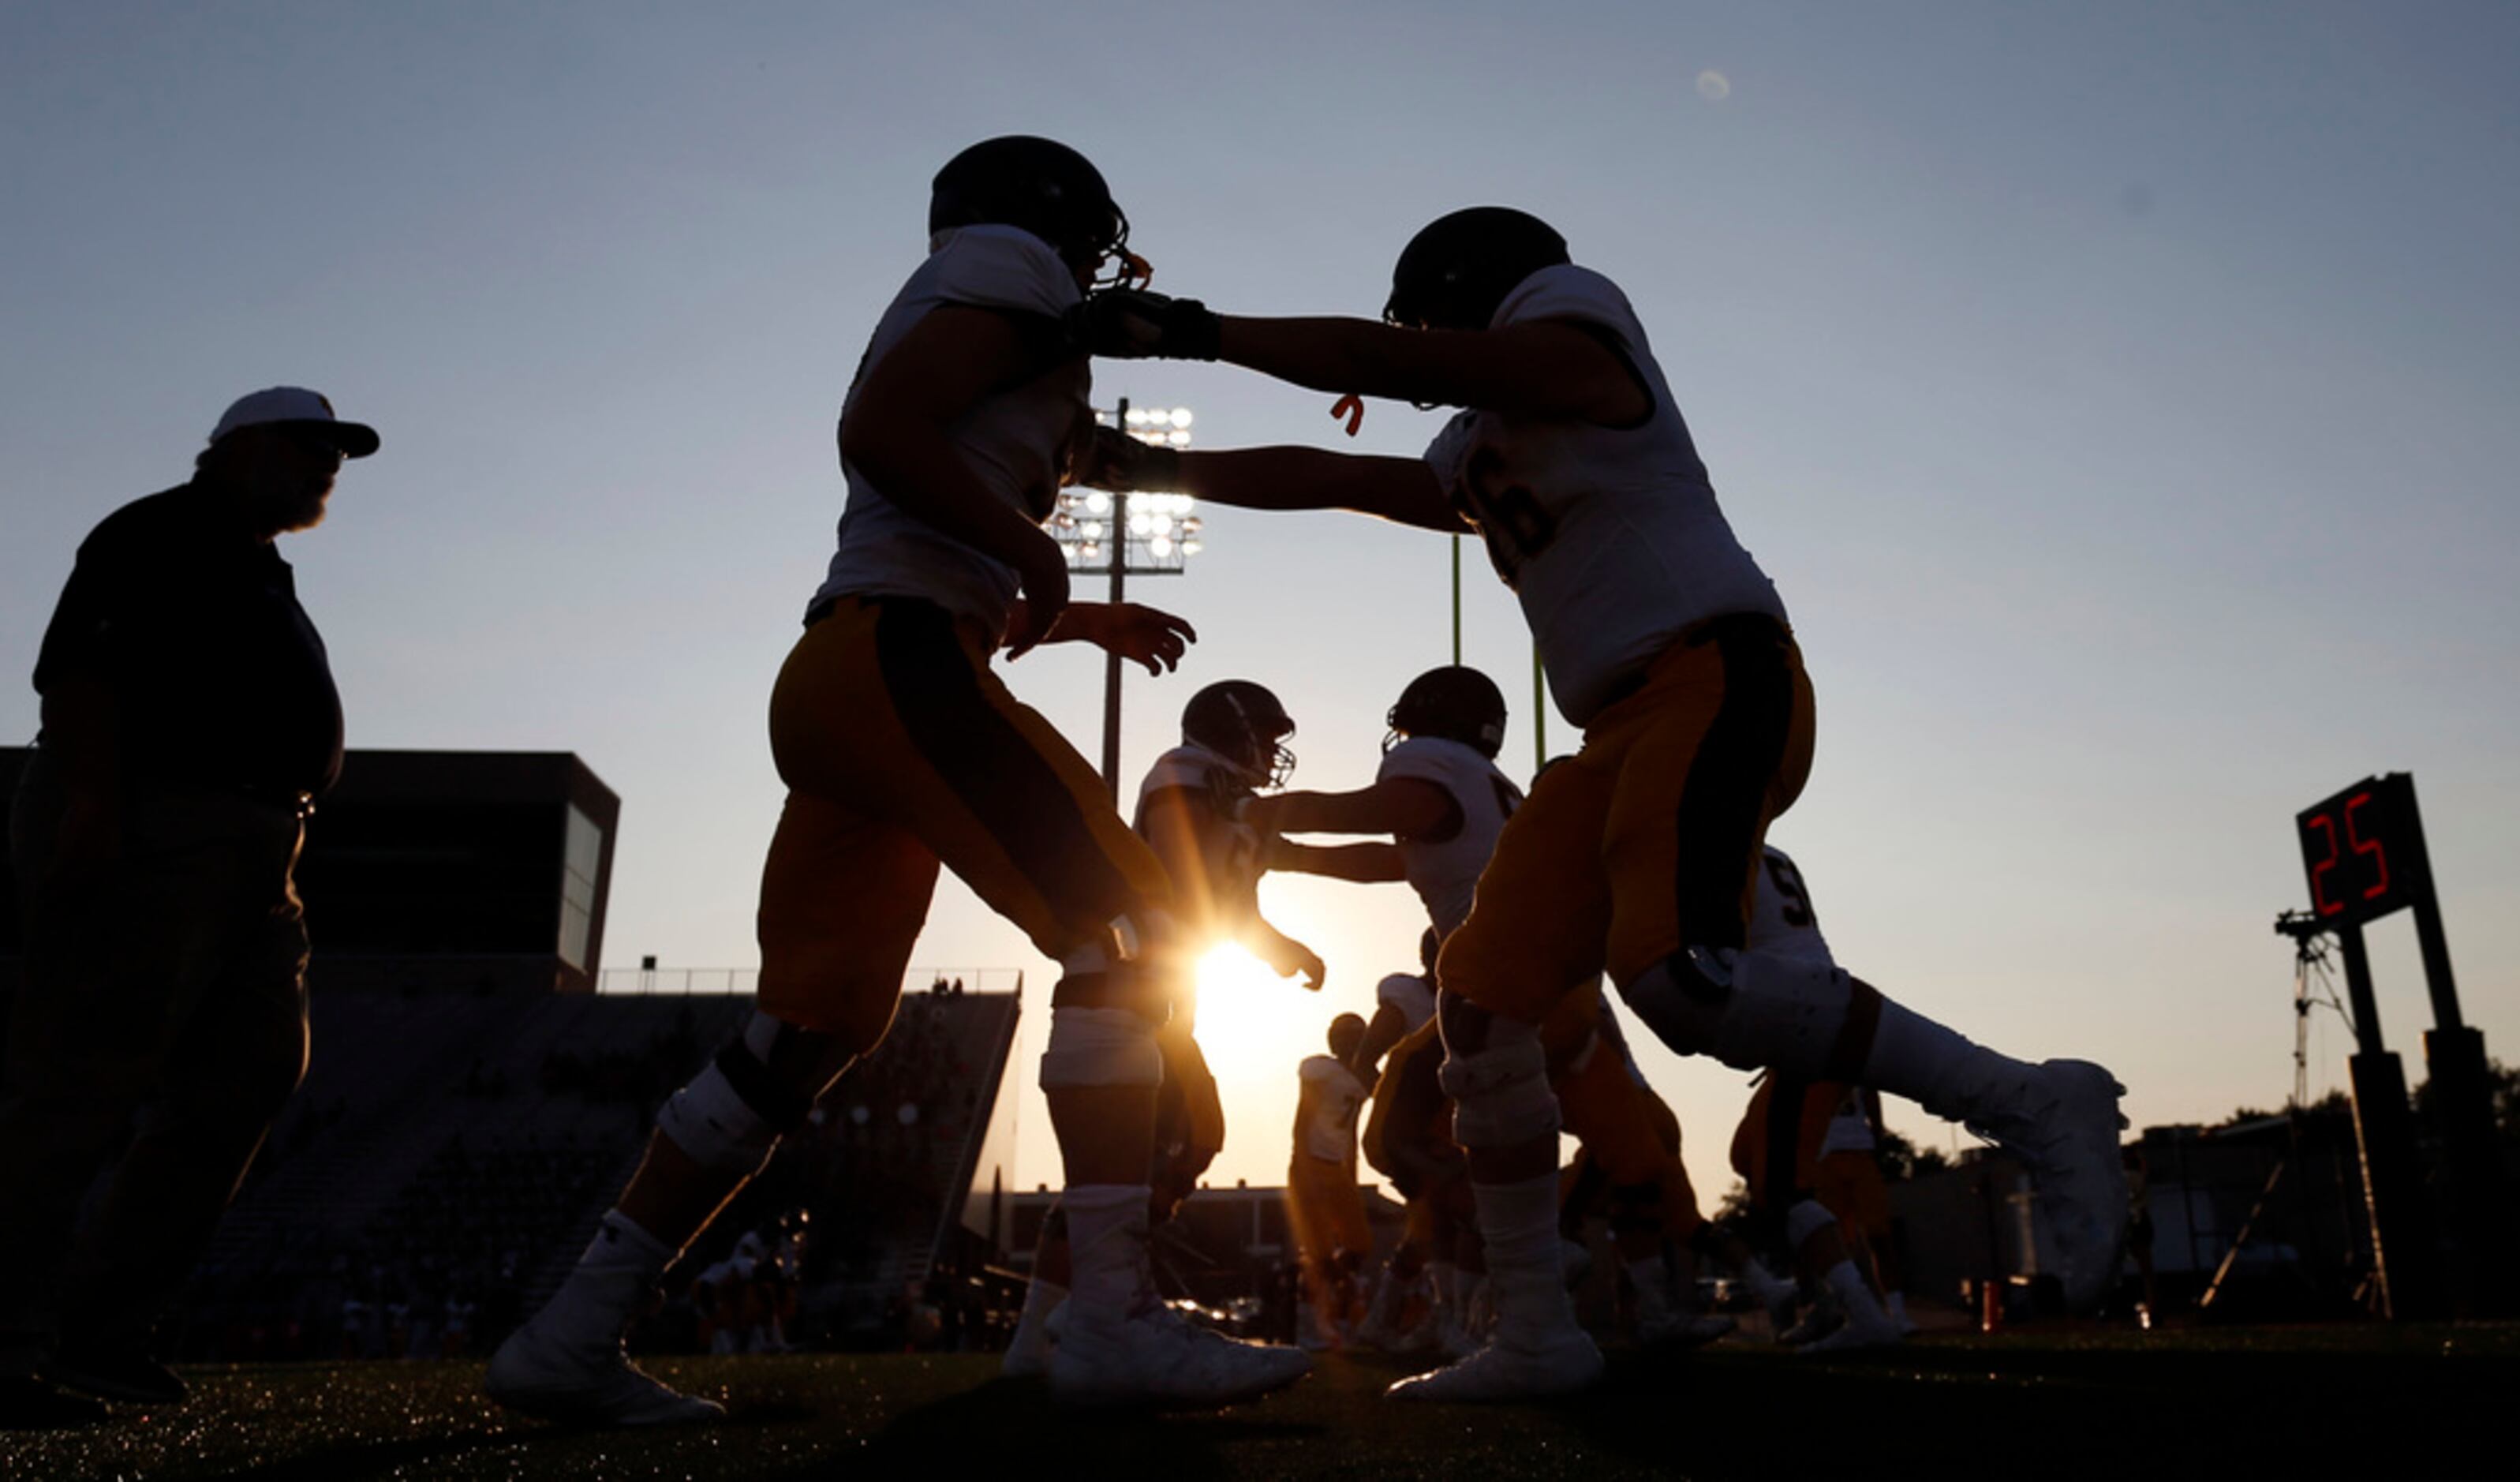 Highland Park players warmup with drills before the start of their high school football game...